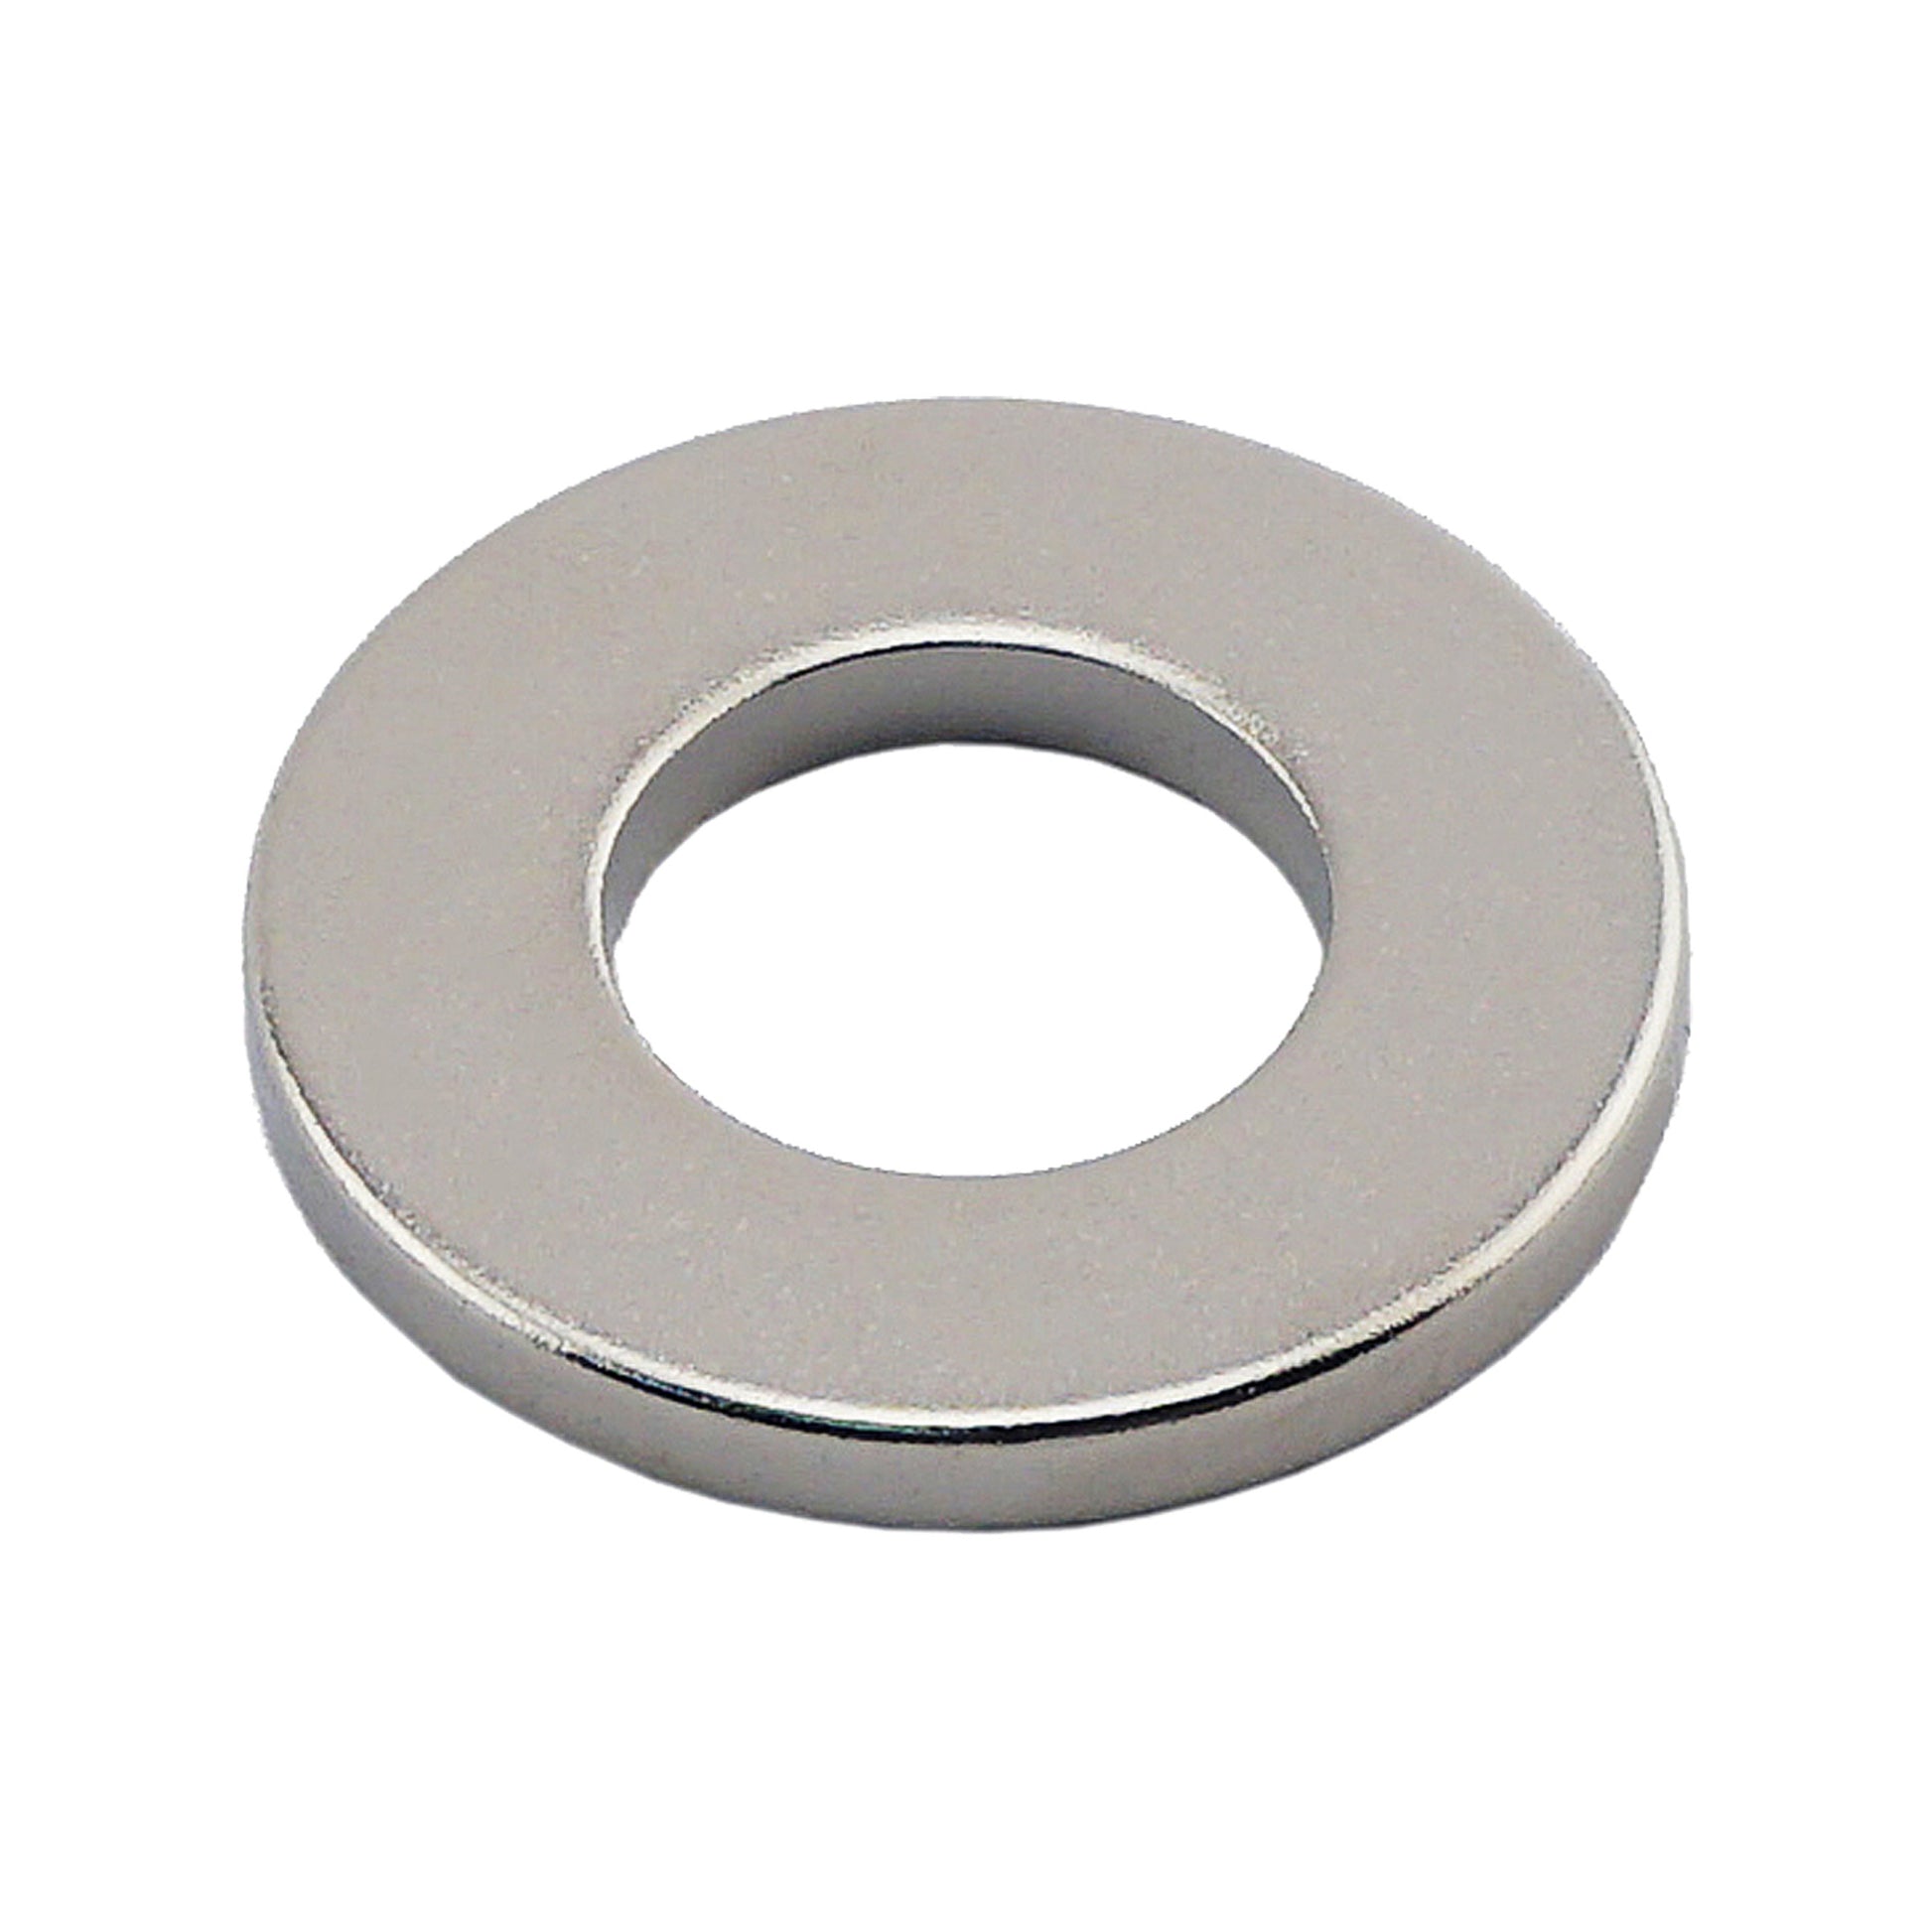 Load image into Gallery viewer, NR010007N Neodymium Ring Magnet - Front View